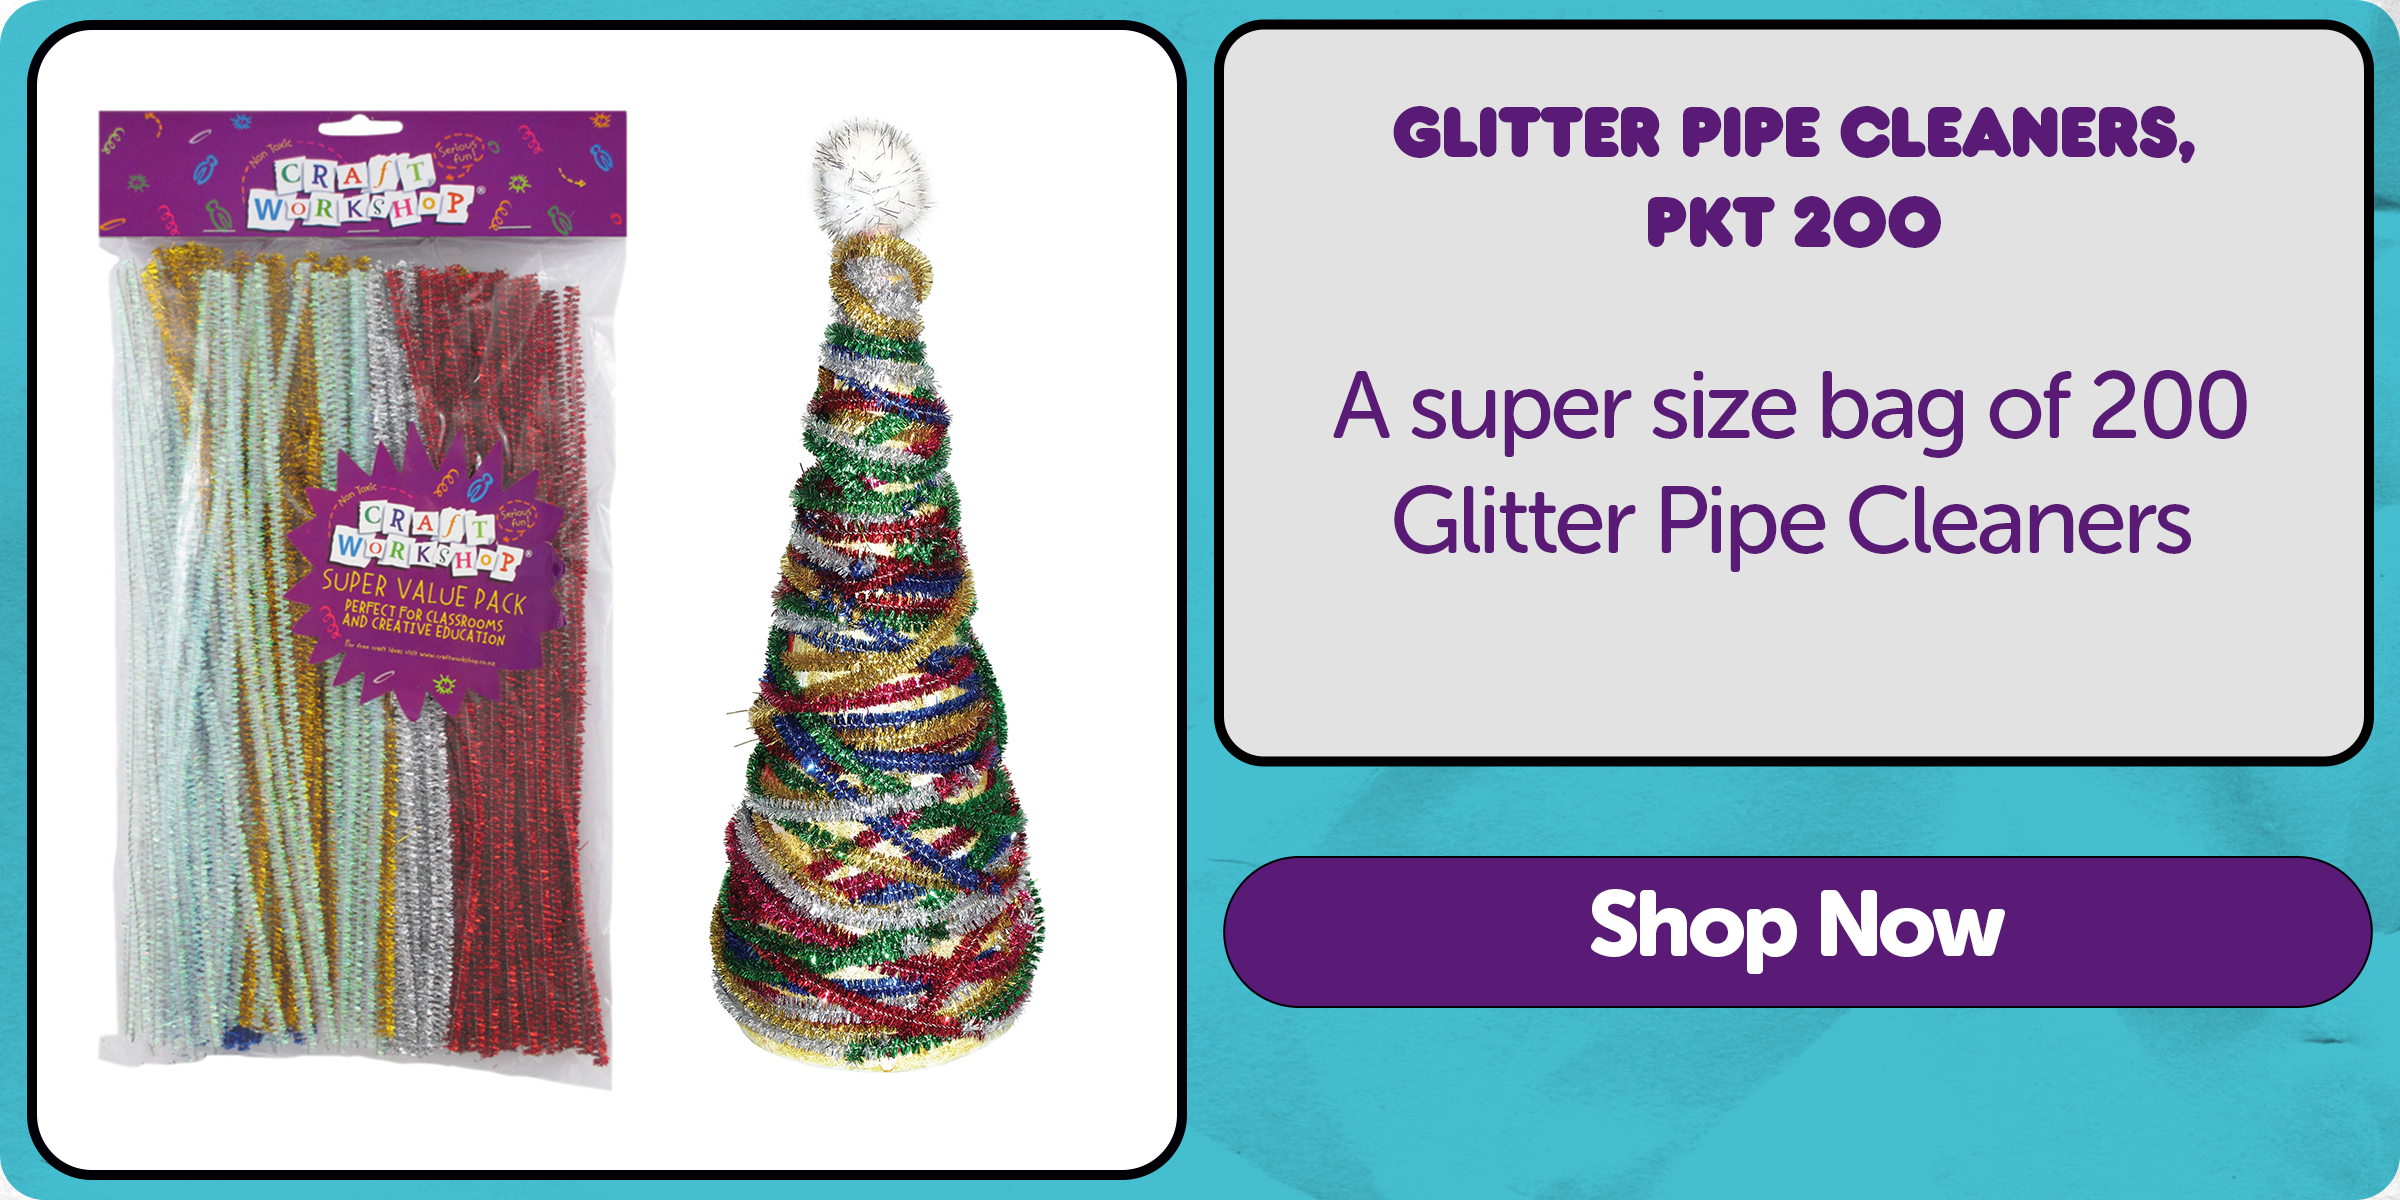 Glitter Pipe Cleaners, Pkt 200